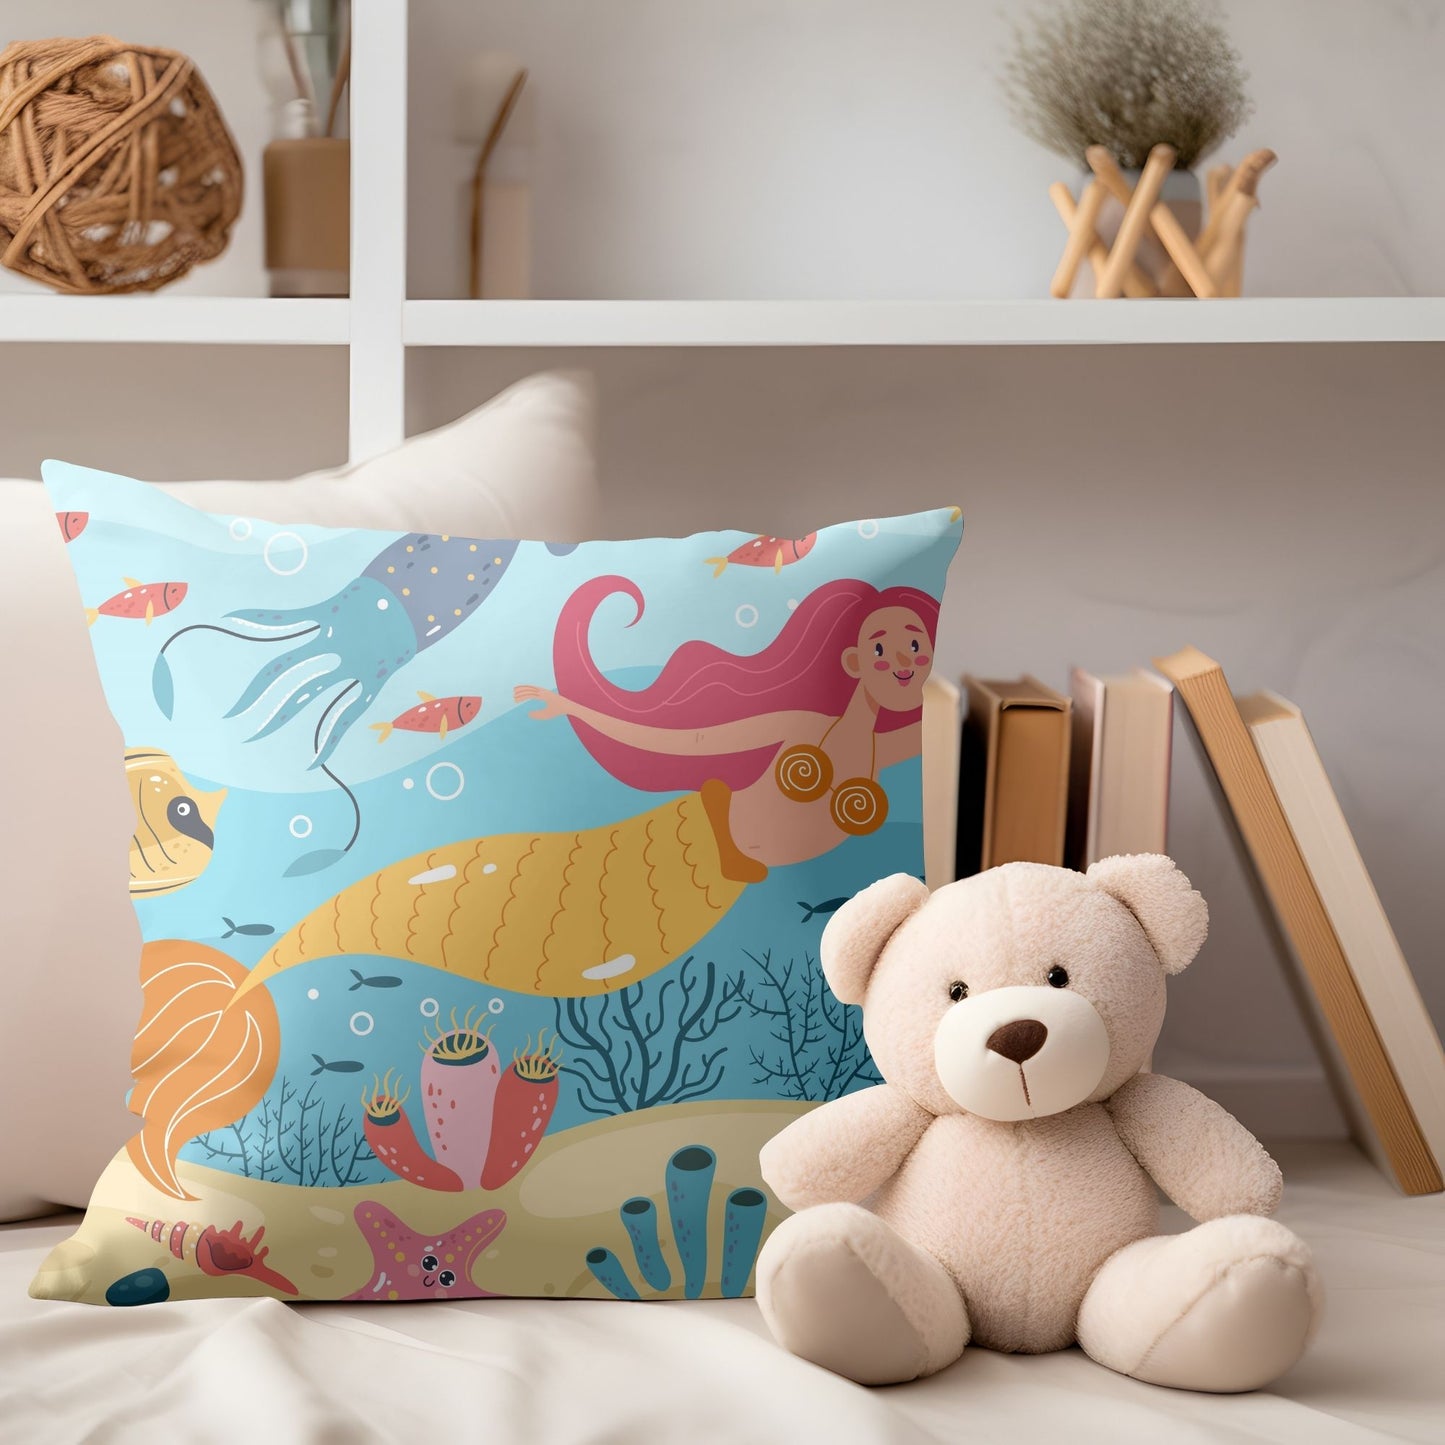 Whimsical mermaid-inspired baby pillow to adorn your little one's room.